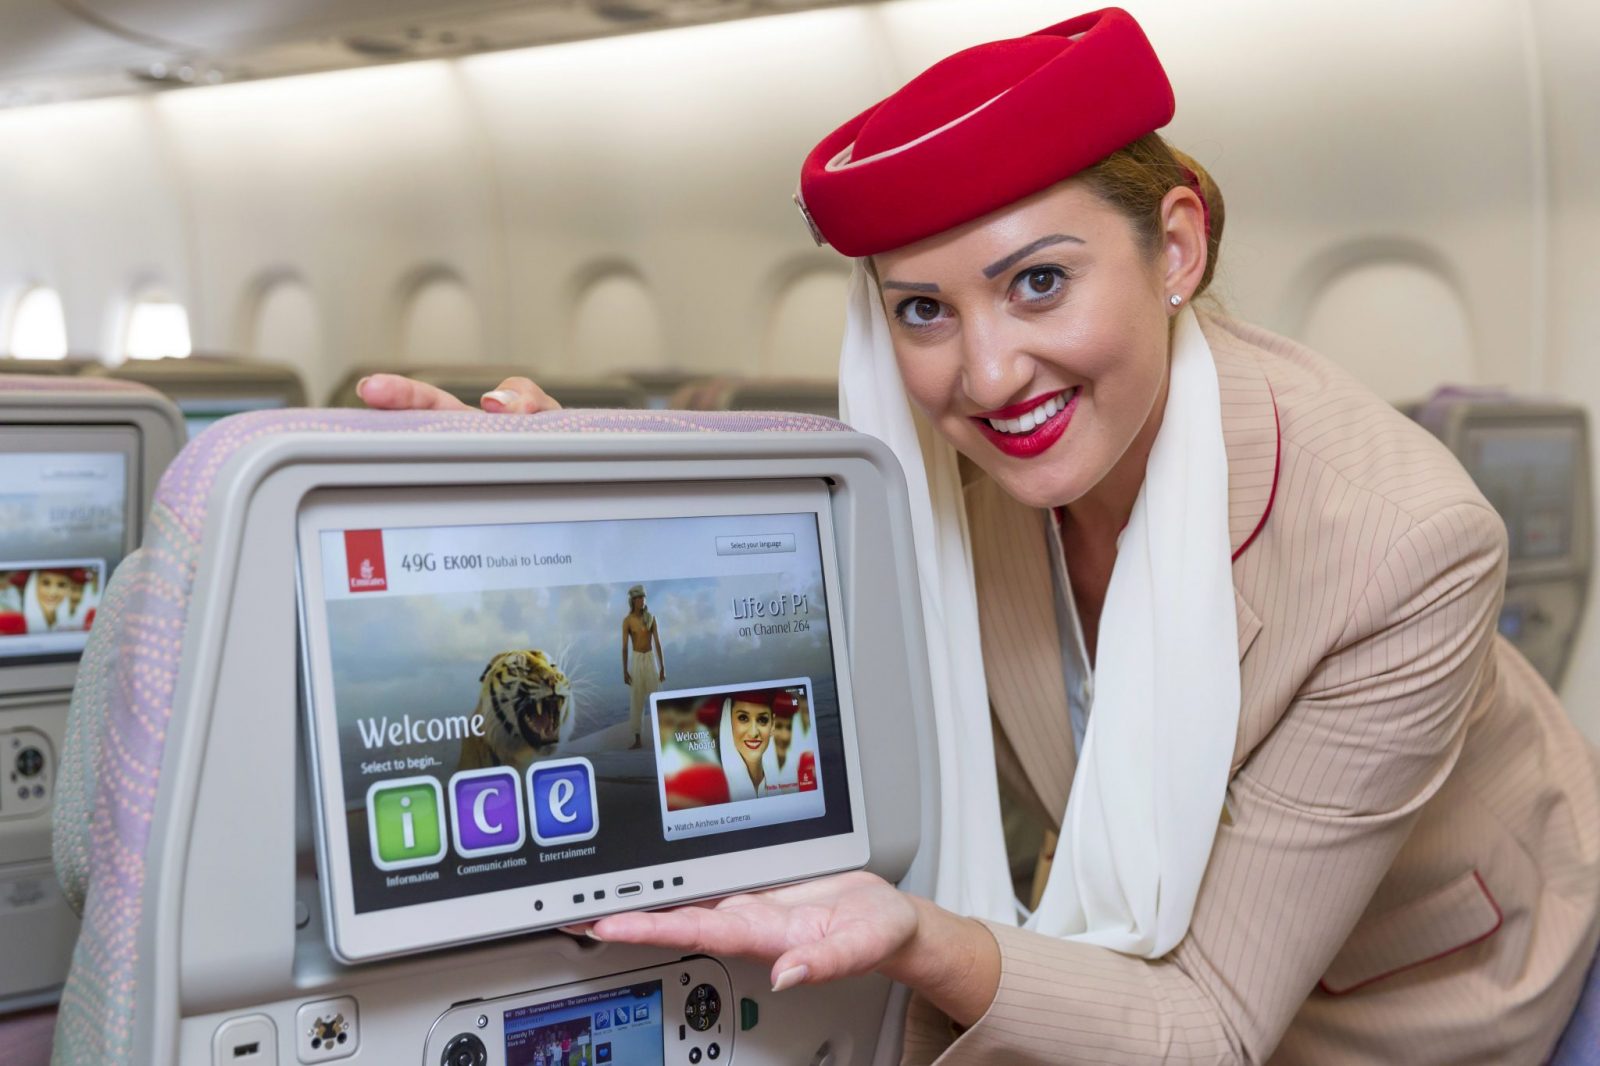 Emirates Might Copy Air New Zealand by Getting Cabin Crew to Wear Augmented Reality Spectacles